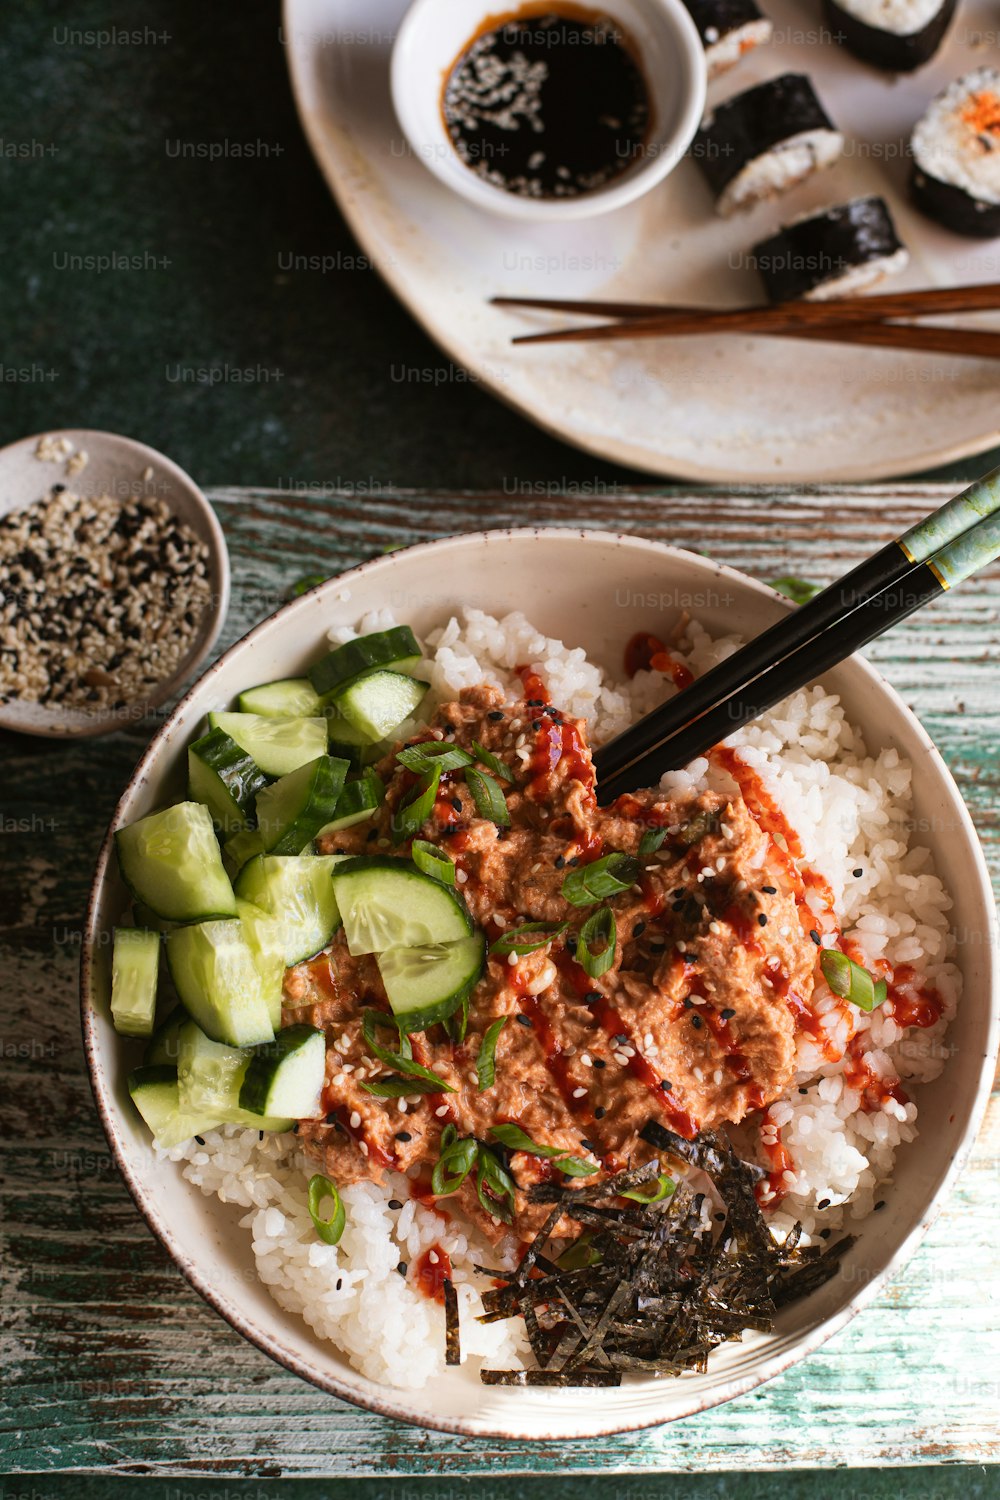 a bowl of rice, cucumbers, and sauce on a table